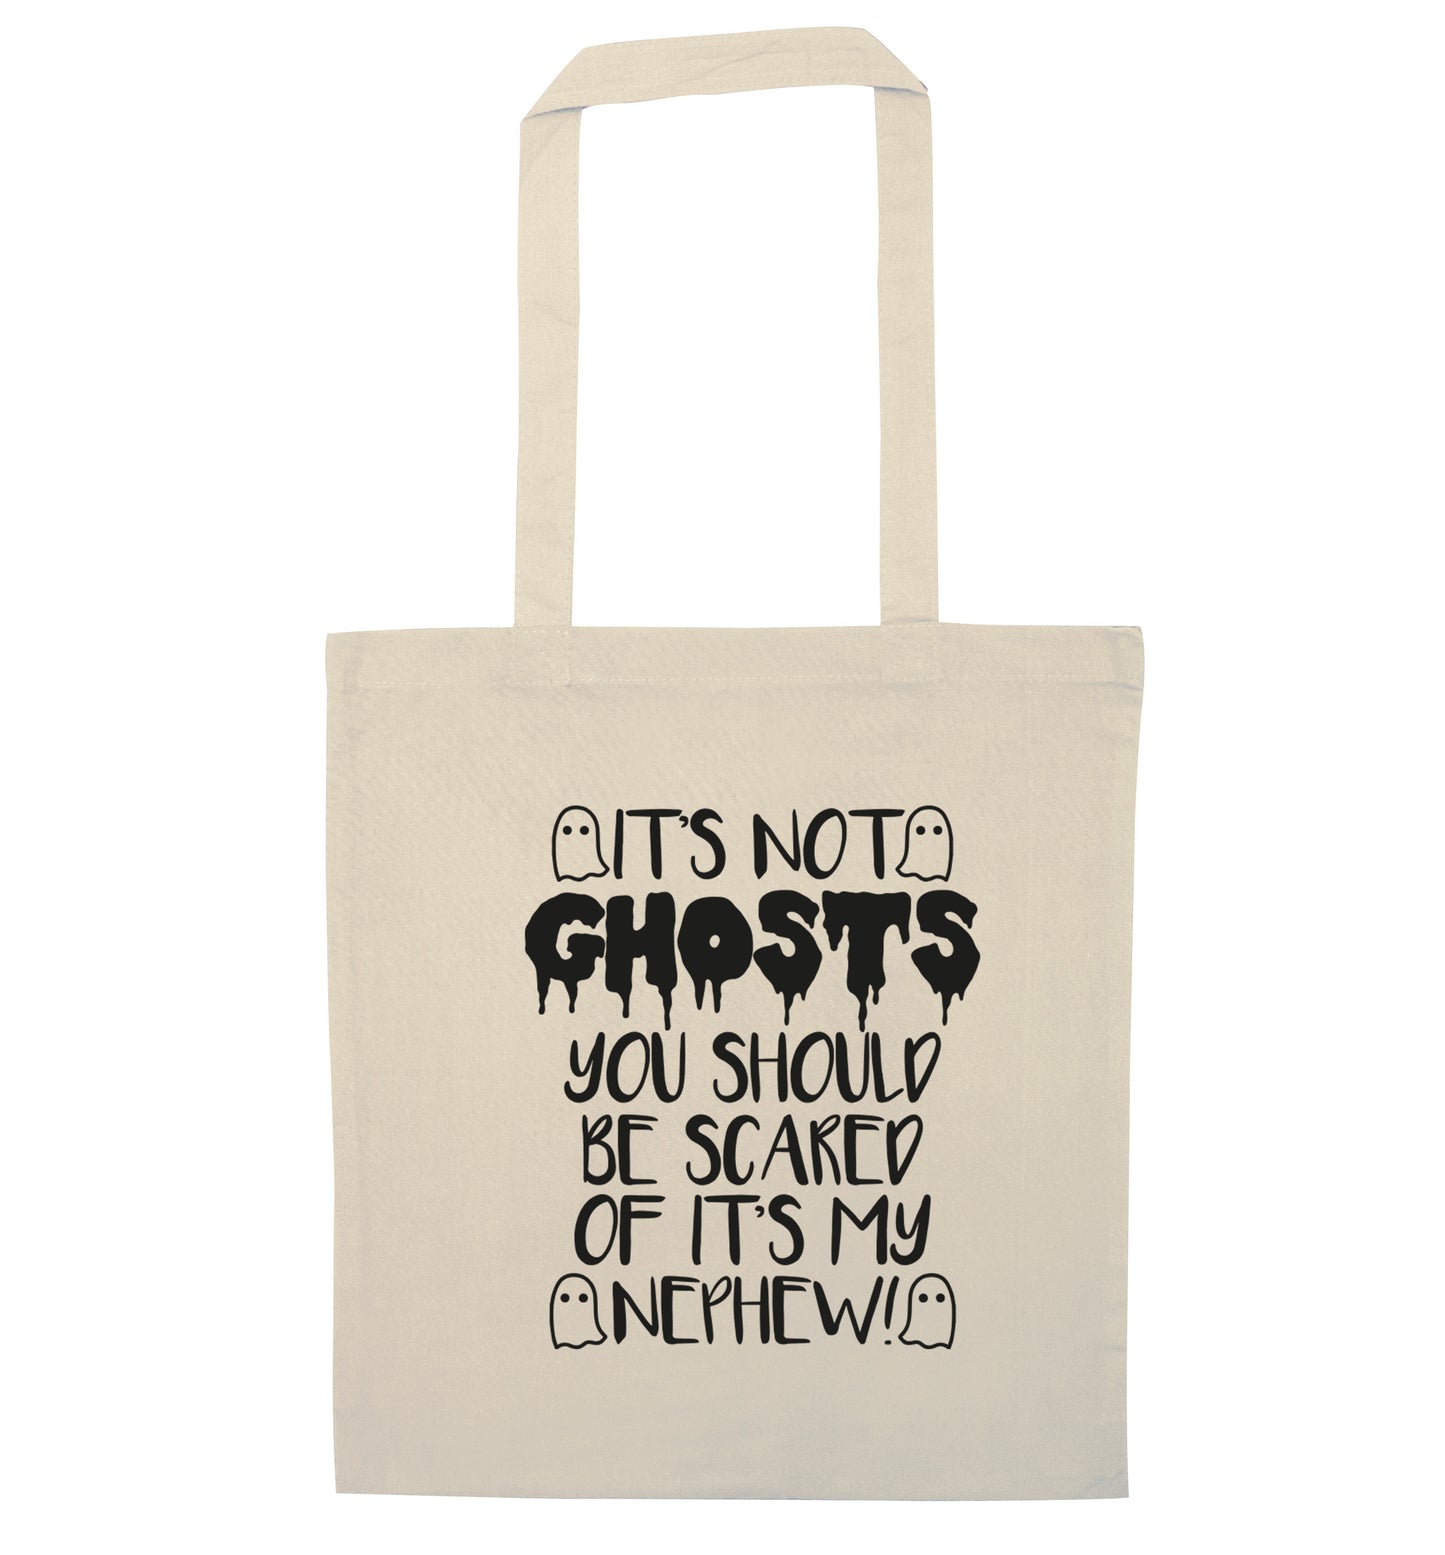 It's not ghosts you should be scared of it's my nephew! natural tote bag